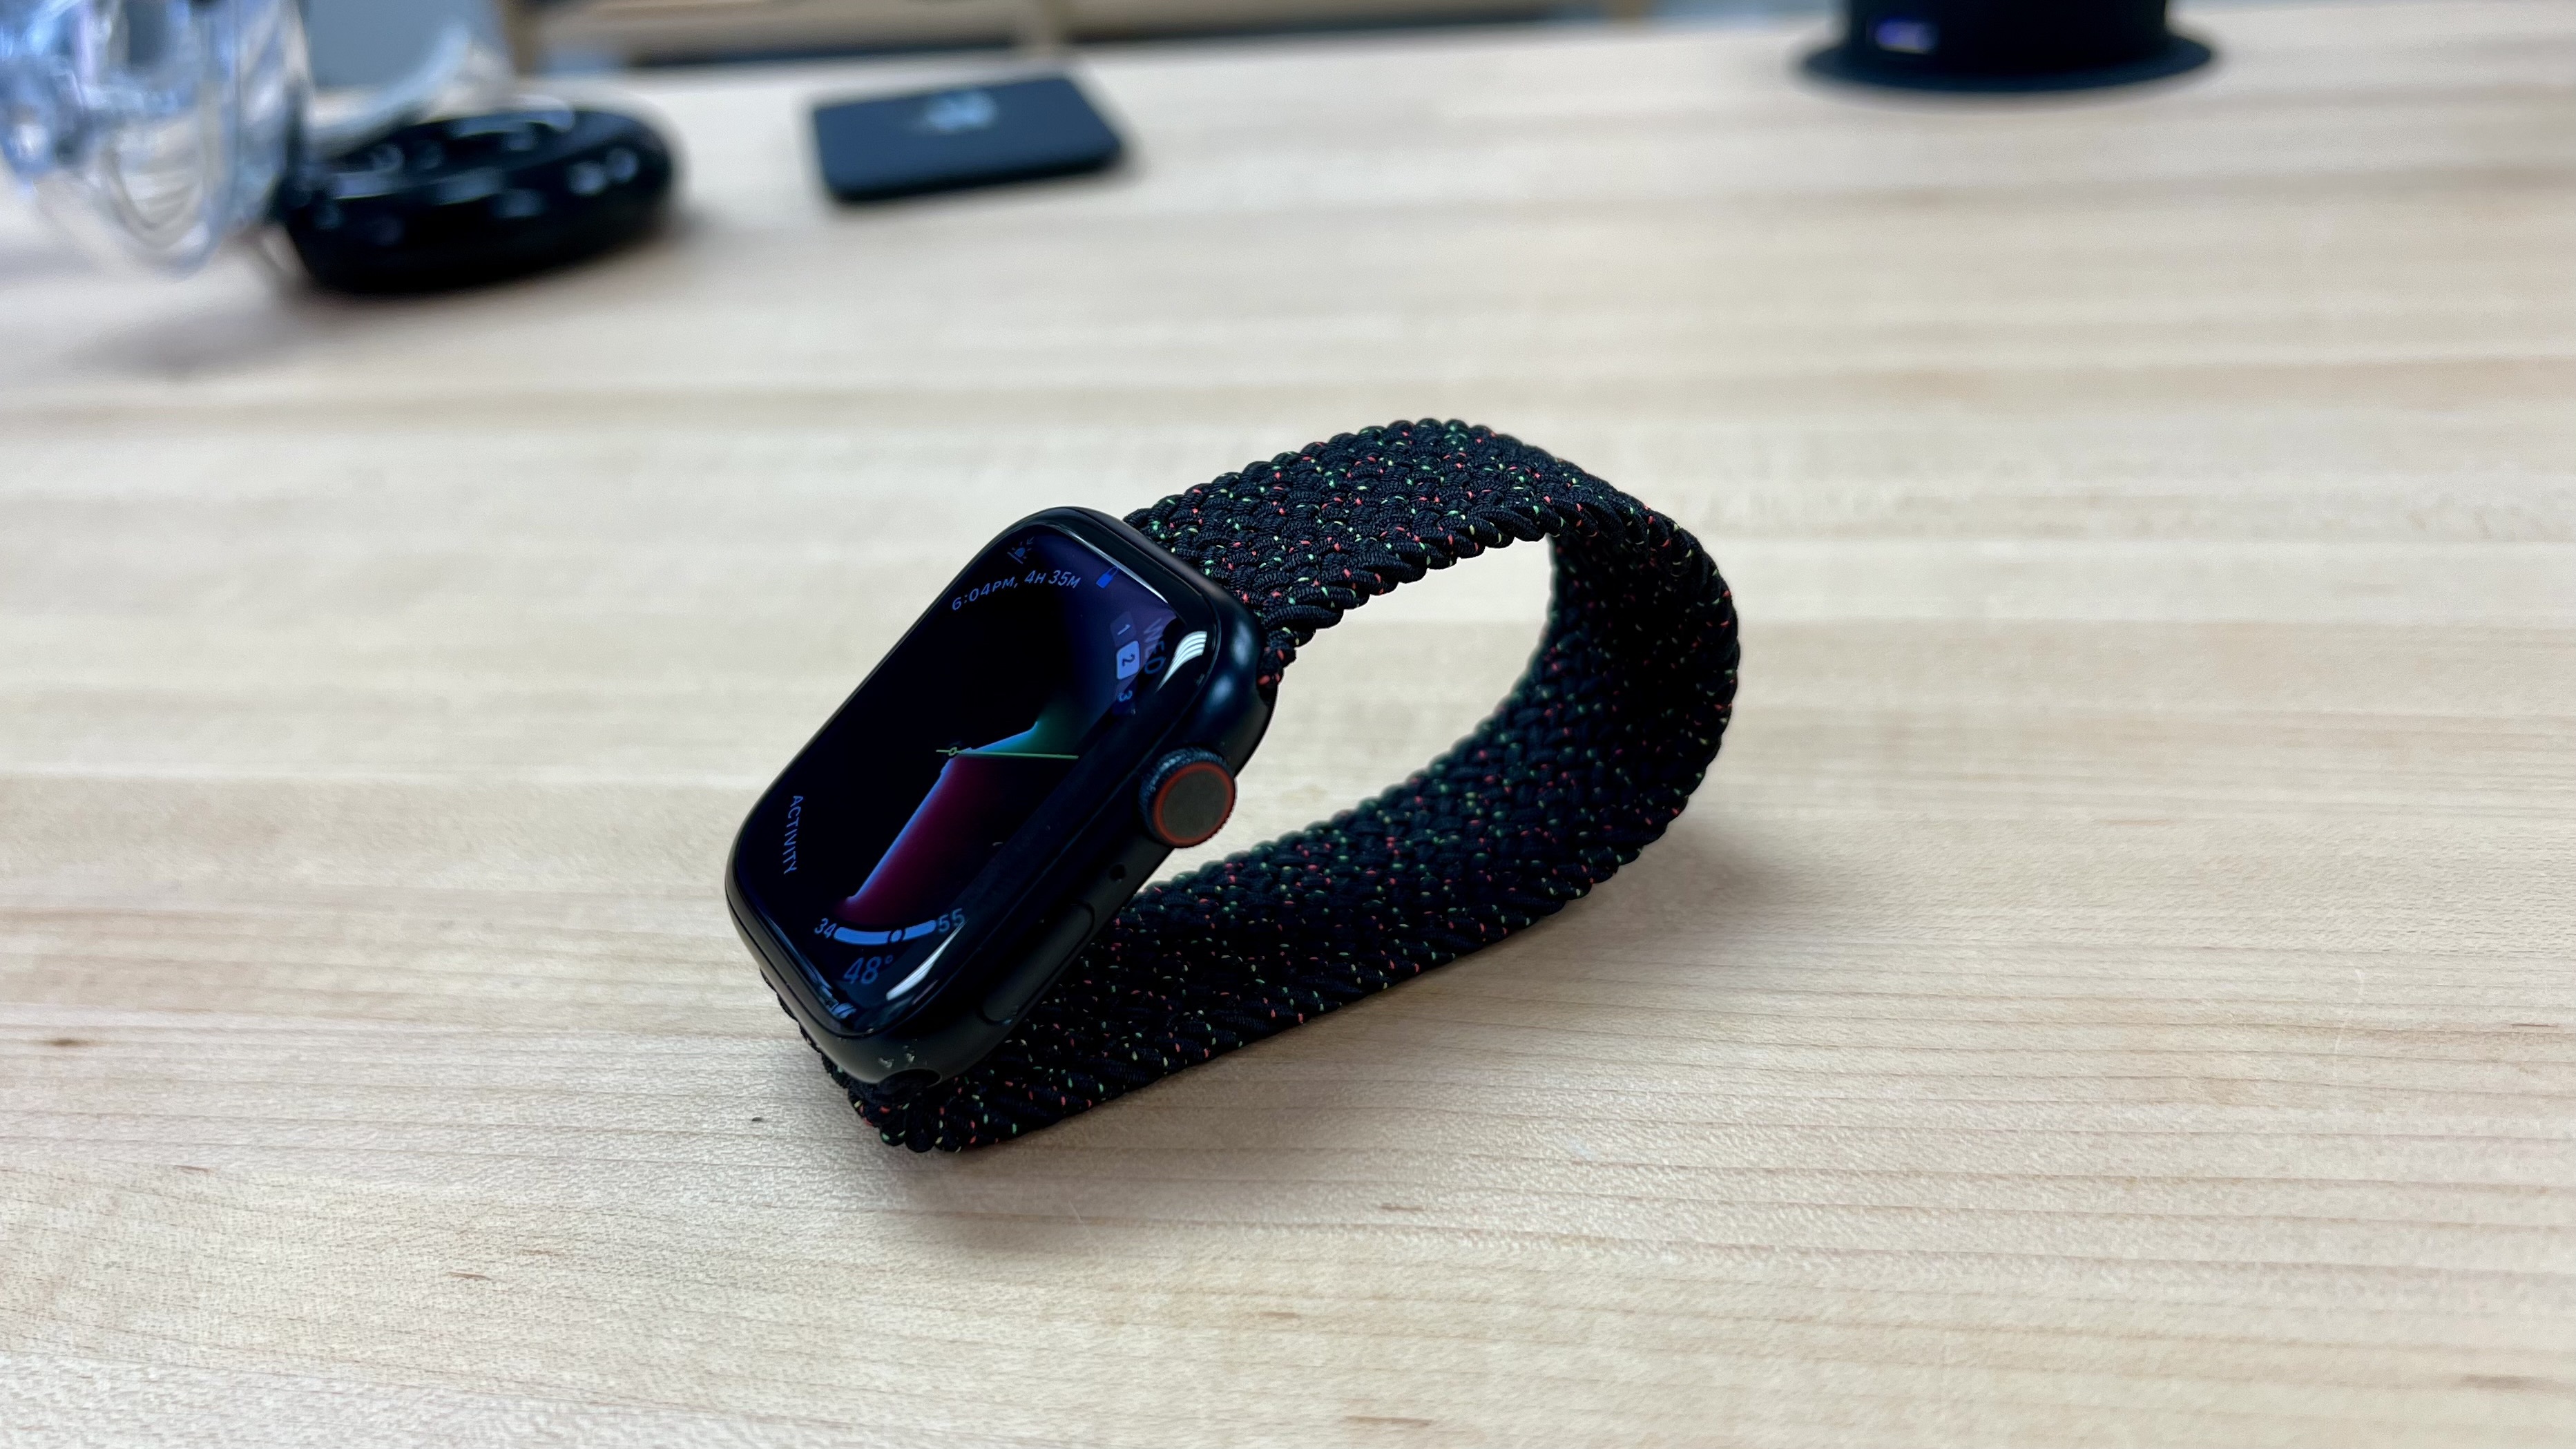 Hands-on with the special edition Apple Watch Black Unity Braided 